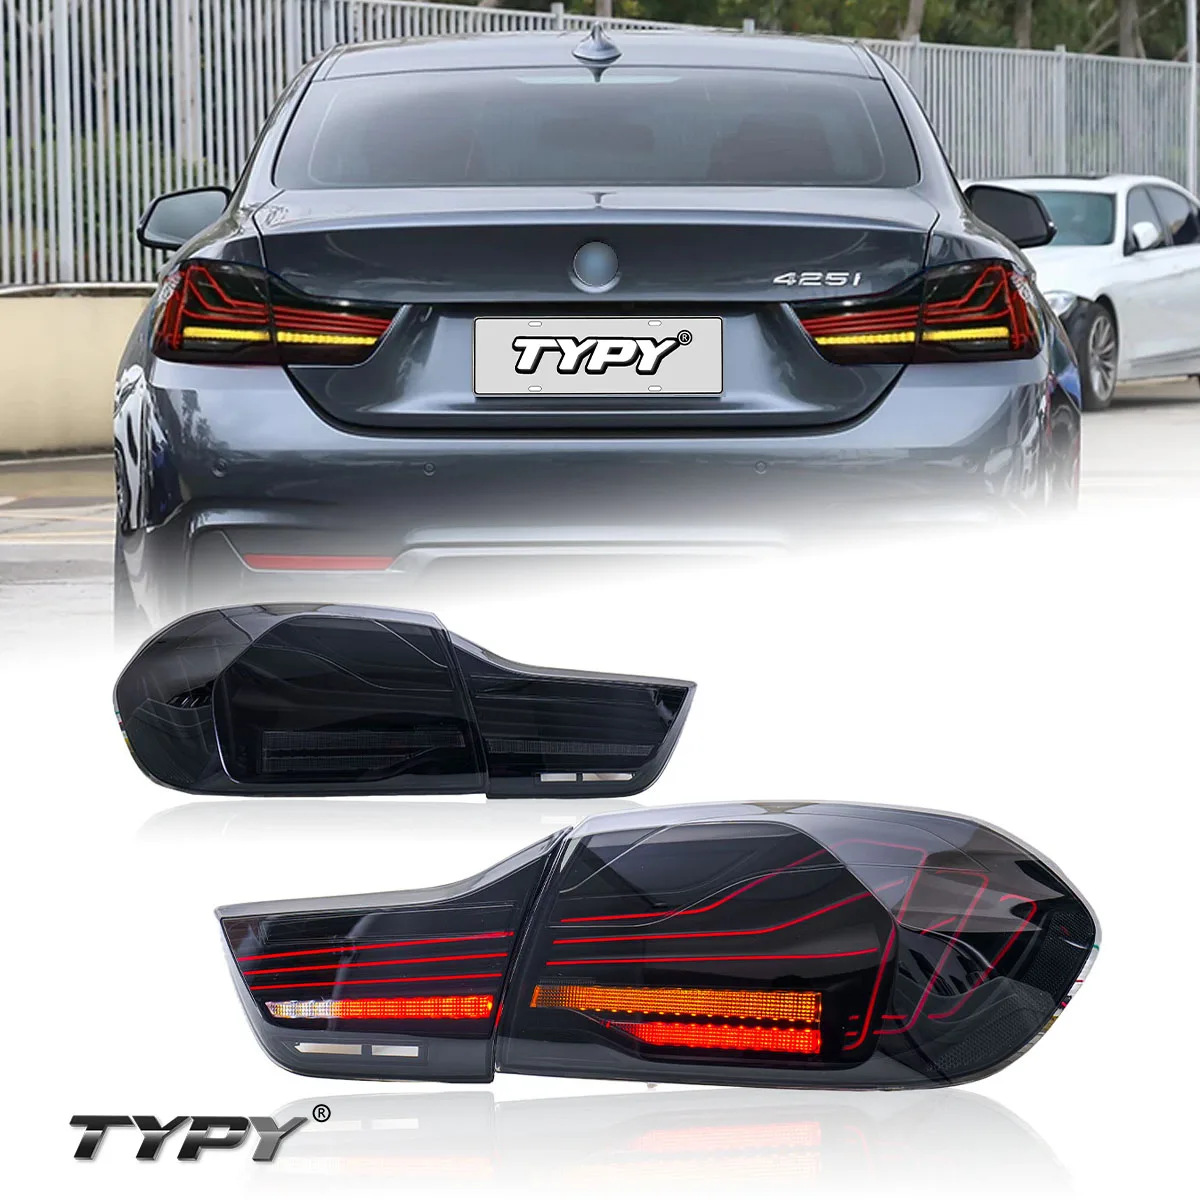 

TYPY Original Wholesale Price Auto Taillight Assembly For BMW 4 Series F32 2013-2019Upgrade Modified Dynamic Turn LED Taillight